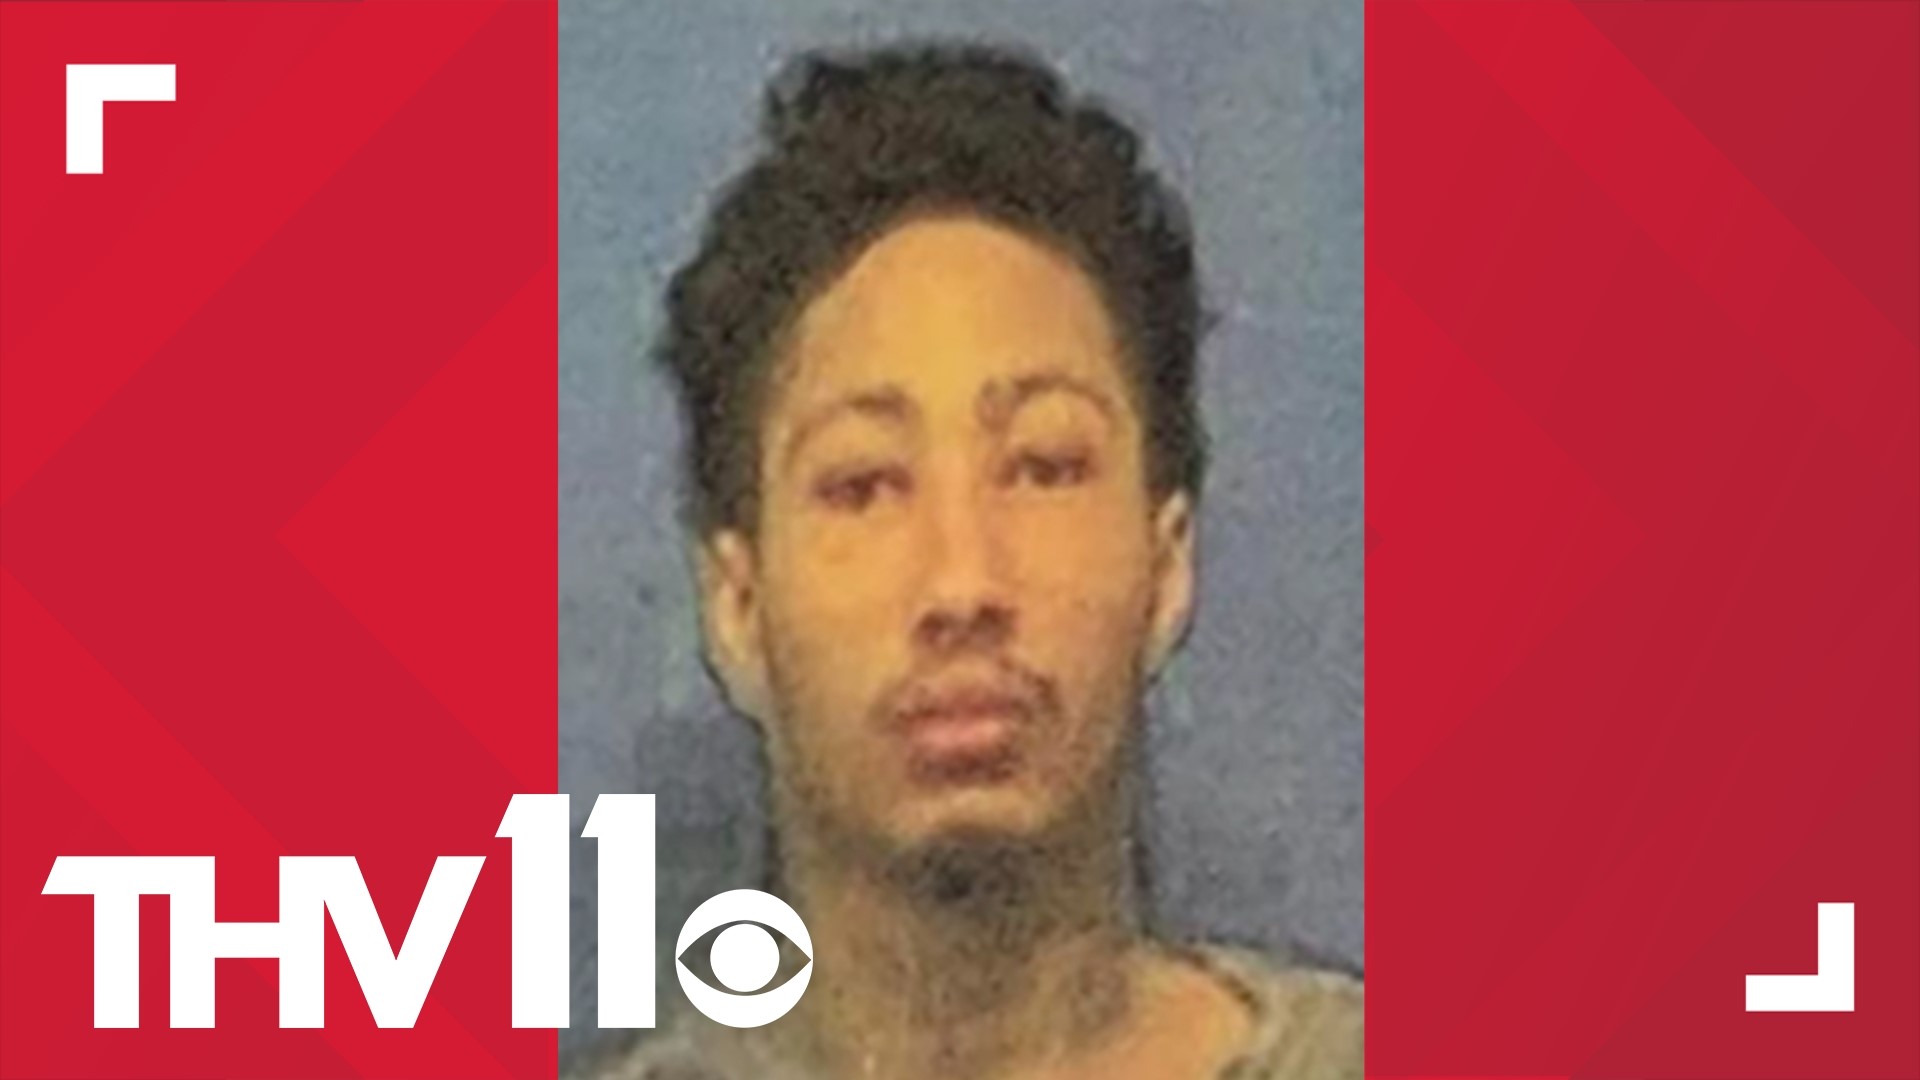 Authorities confirmed that Wuanya Smith, a Saline County escapee who had an active warrant out for murder, has been captured. Two others were arrested for assisting.